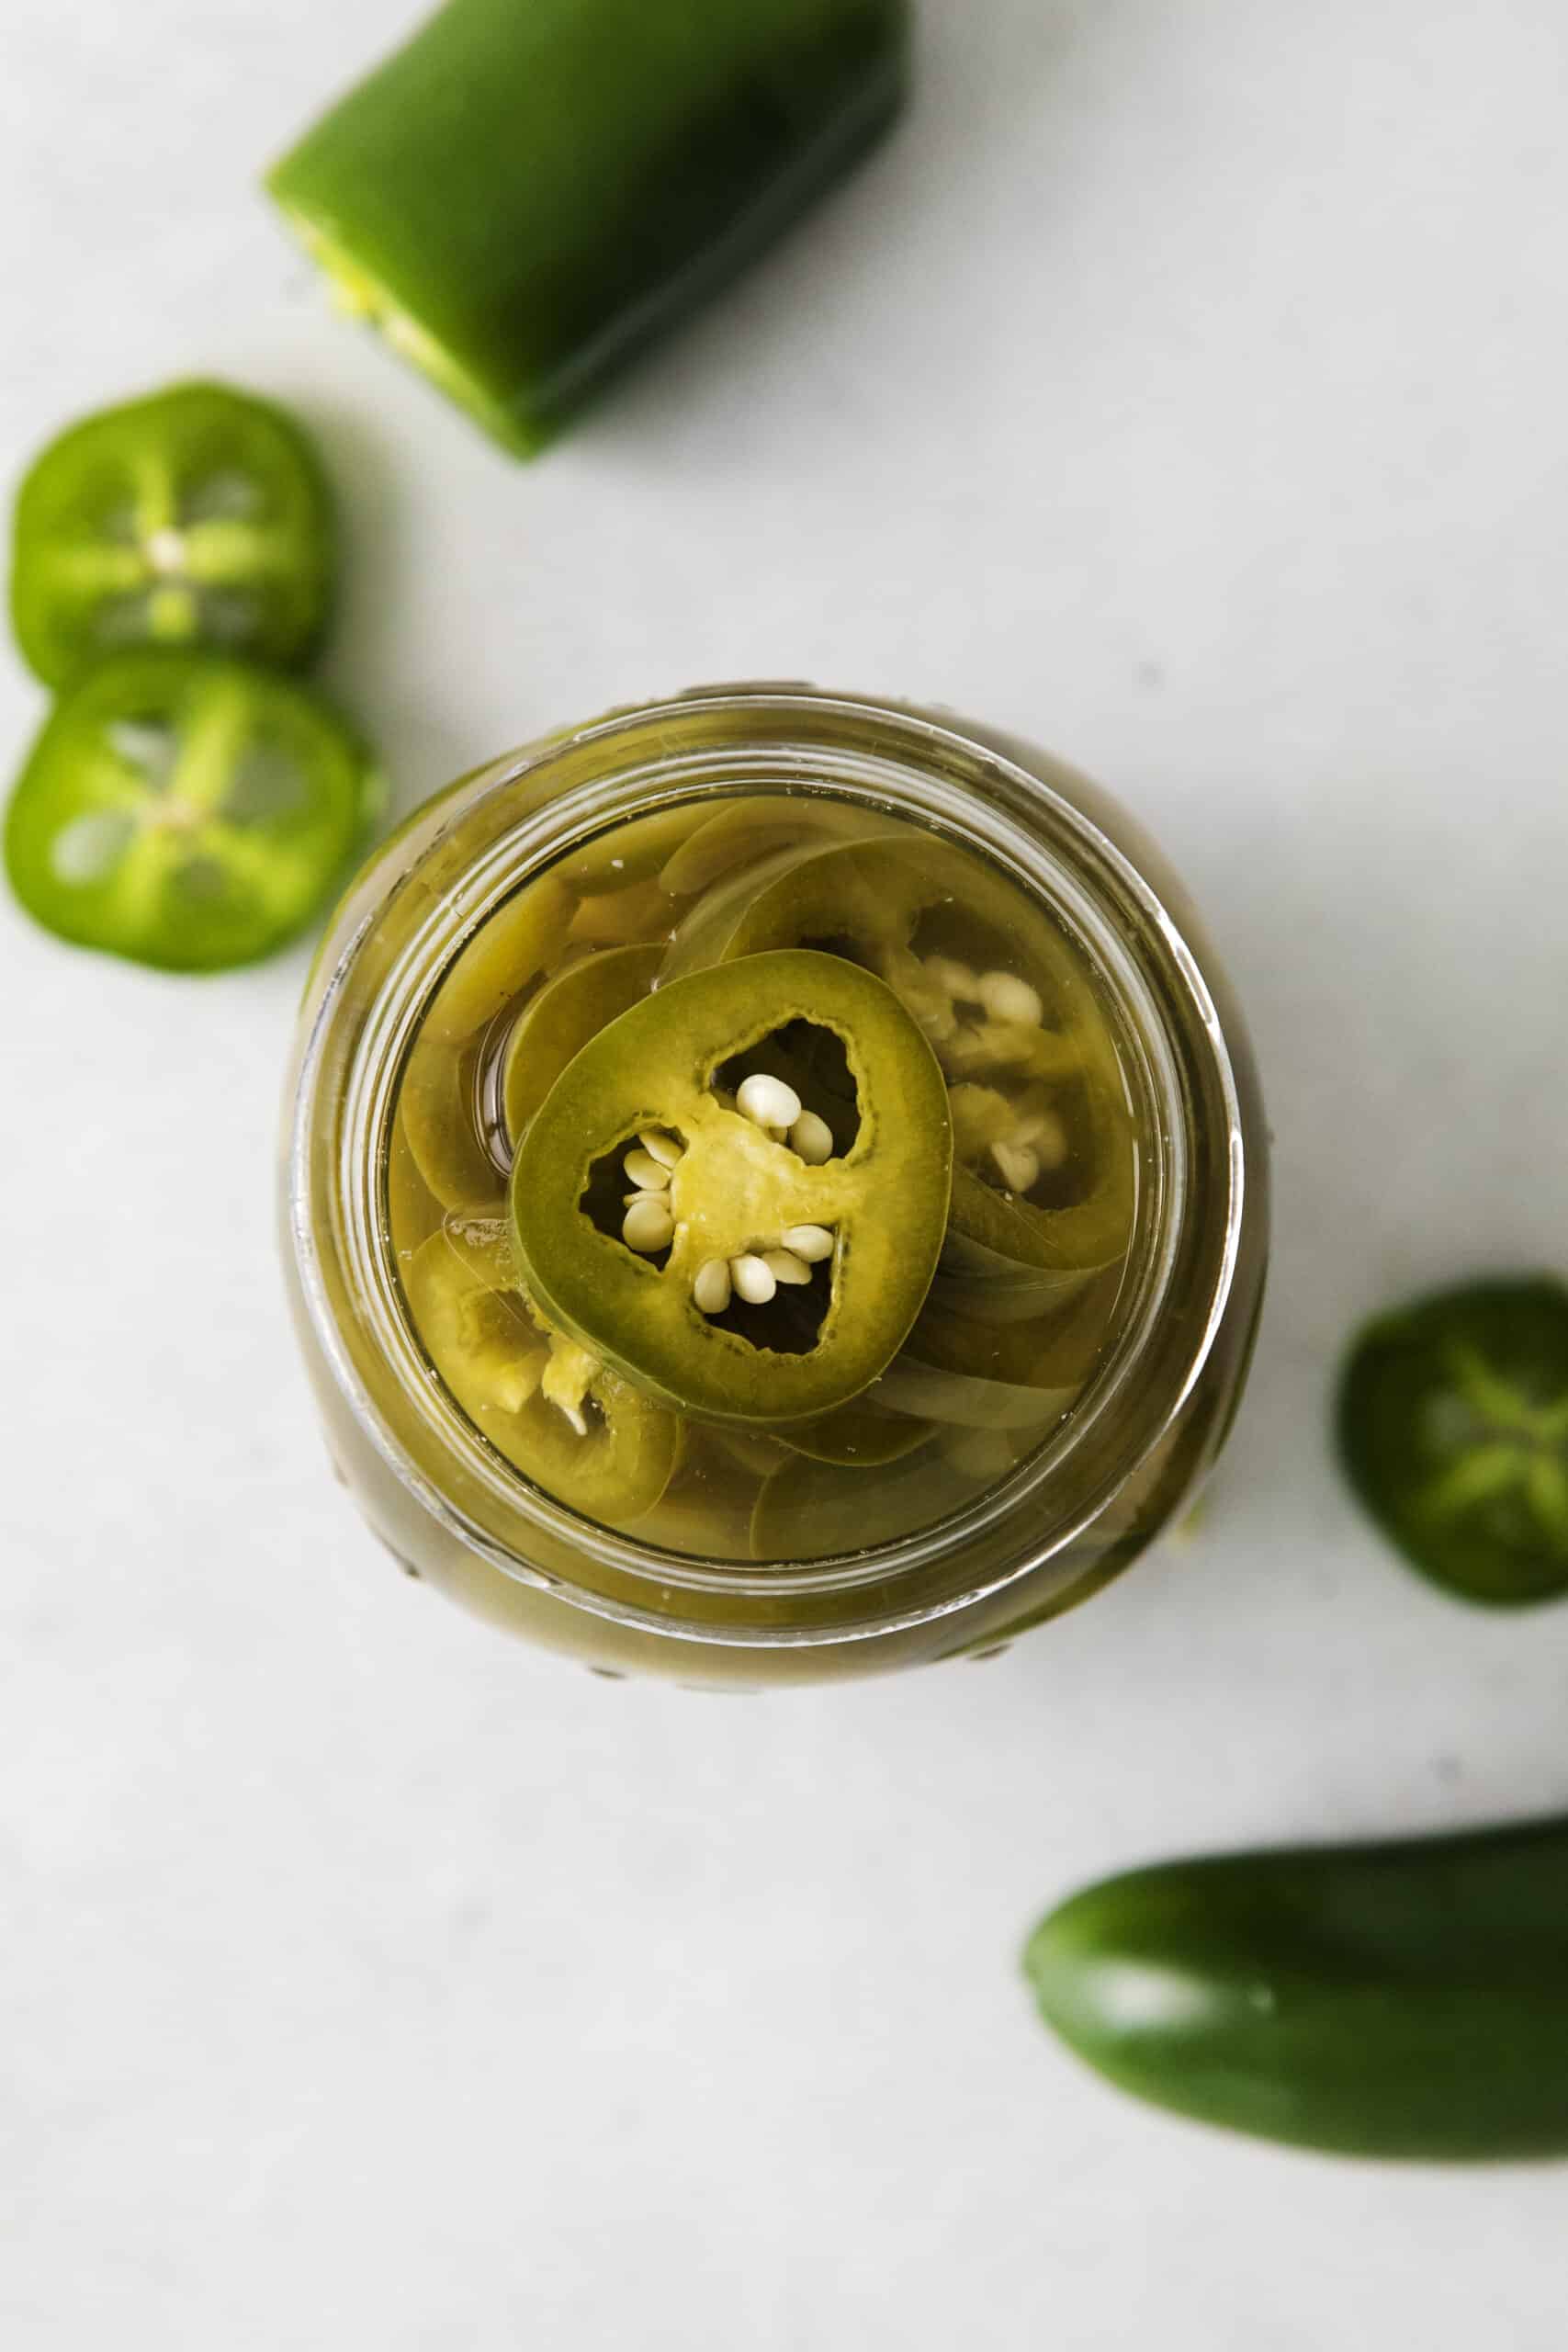 Overhead view of a jar of jalapenos